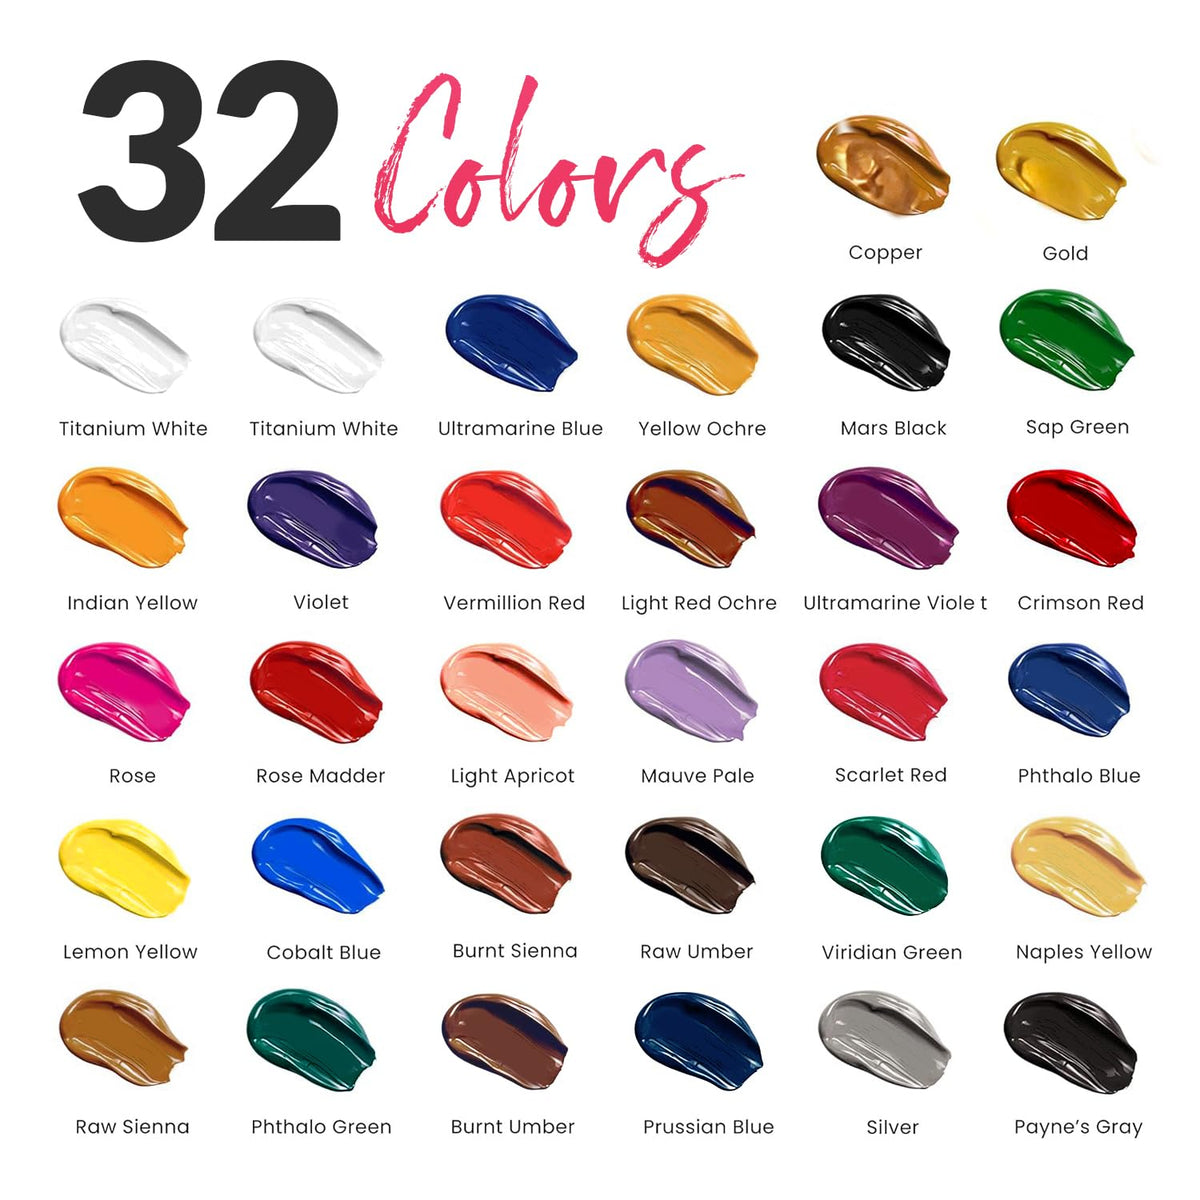 56 Pcs Canvas Painting Kit with 32 Paints (22ml), 10 Brushes, 10 Canvases, Tabletop Easel, Palette, Knife